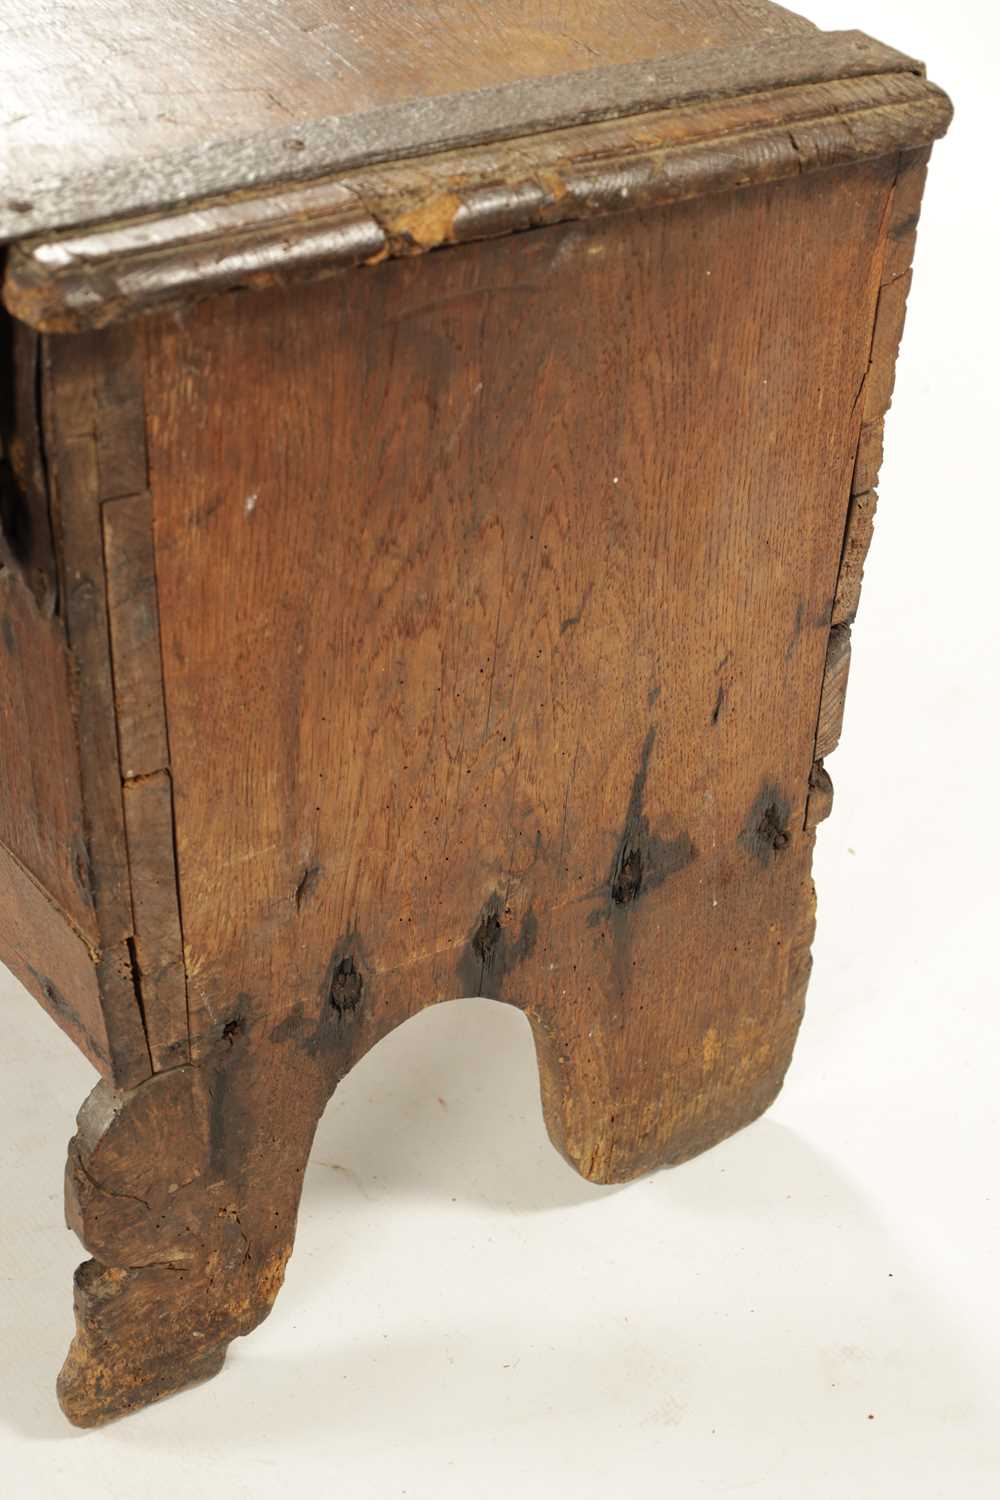 A RARE 16TH / 17TH CENTURY OAK IRON BOUND STRONG BOX/PLANK COFFER - Image 7 of 8